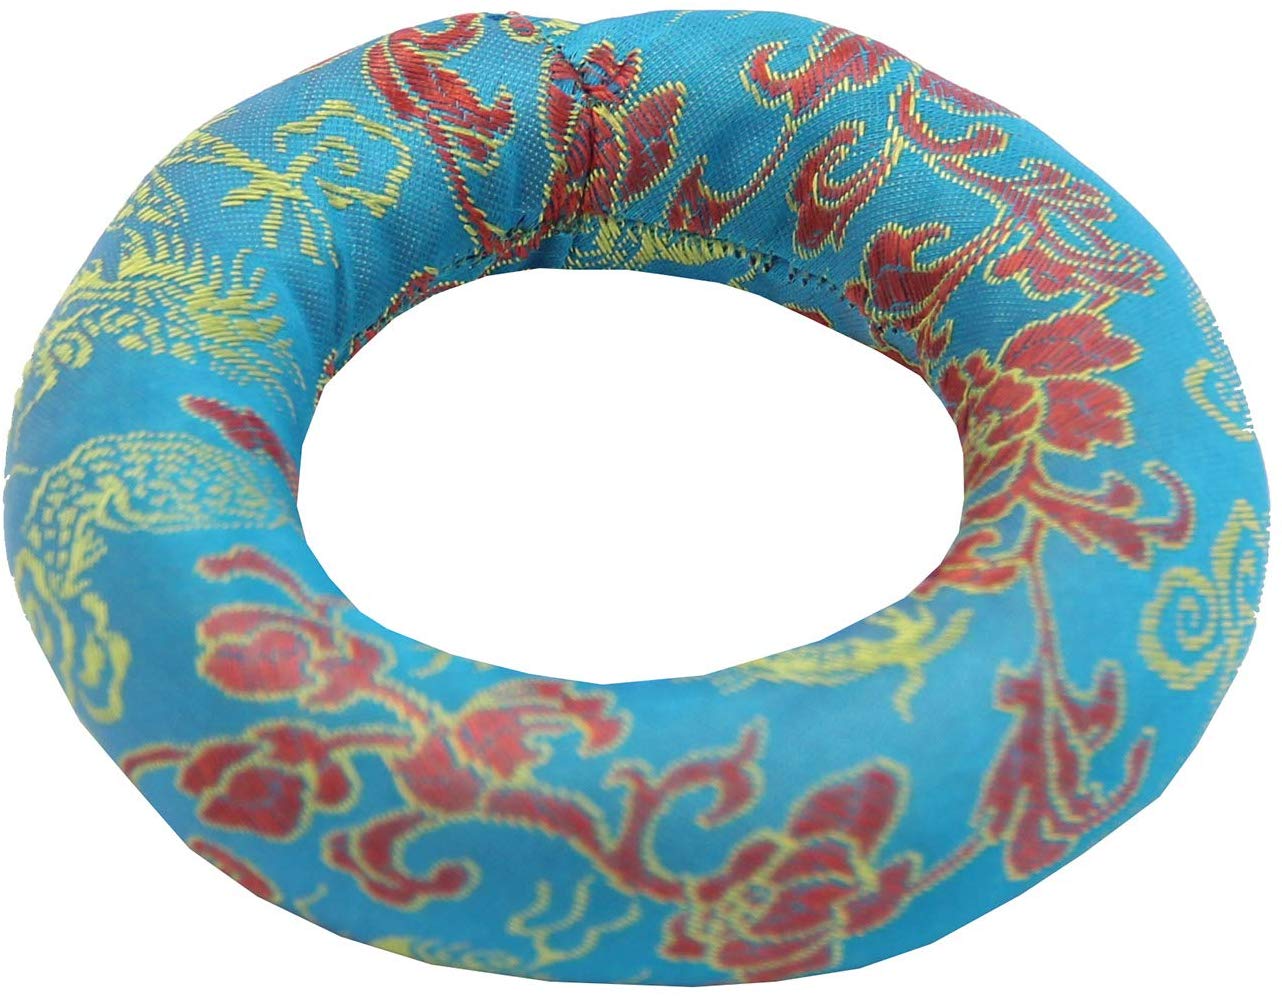 Silk Brocade Ring Cushion Pillow for Tibetan Singing Bowl Hand Made Nepal (Turquoise) - DharmaObjects